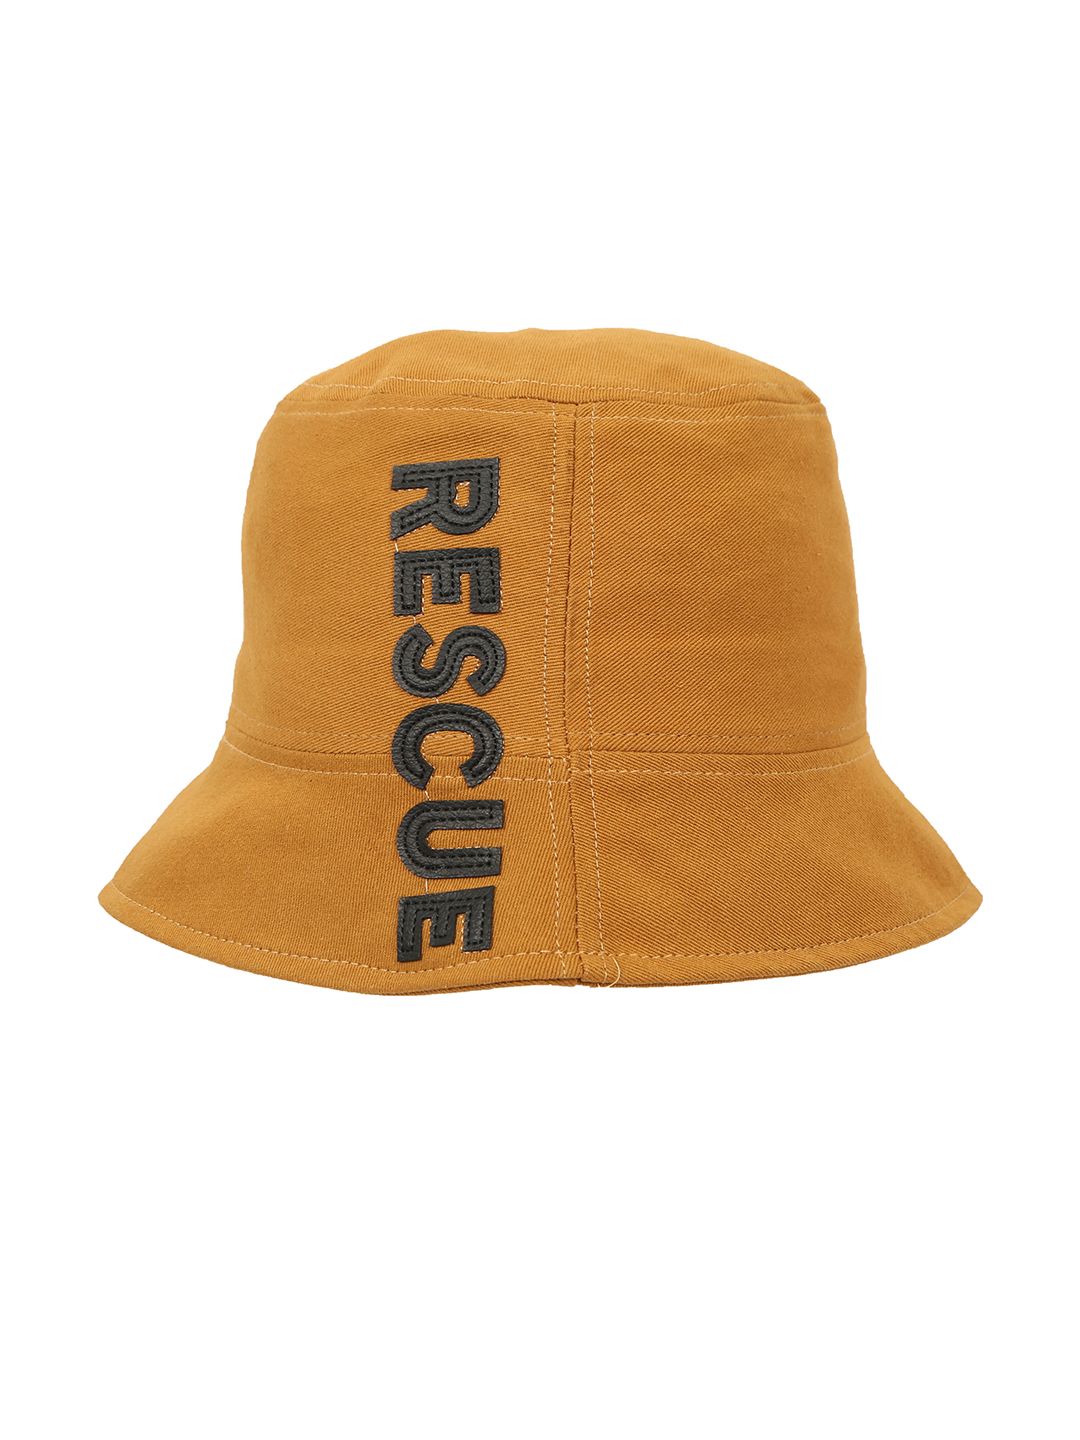 FabSeasons Brown & Black Printed Pure Cotton Bucket Hat Price in India